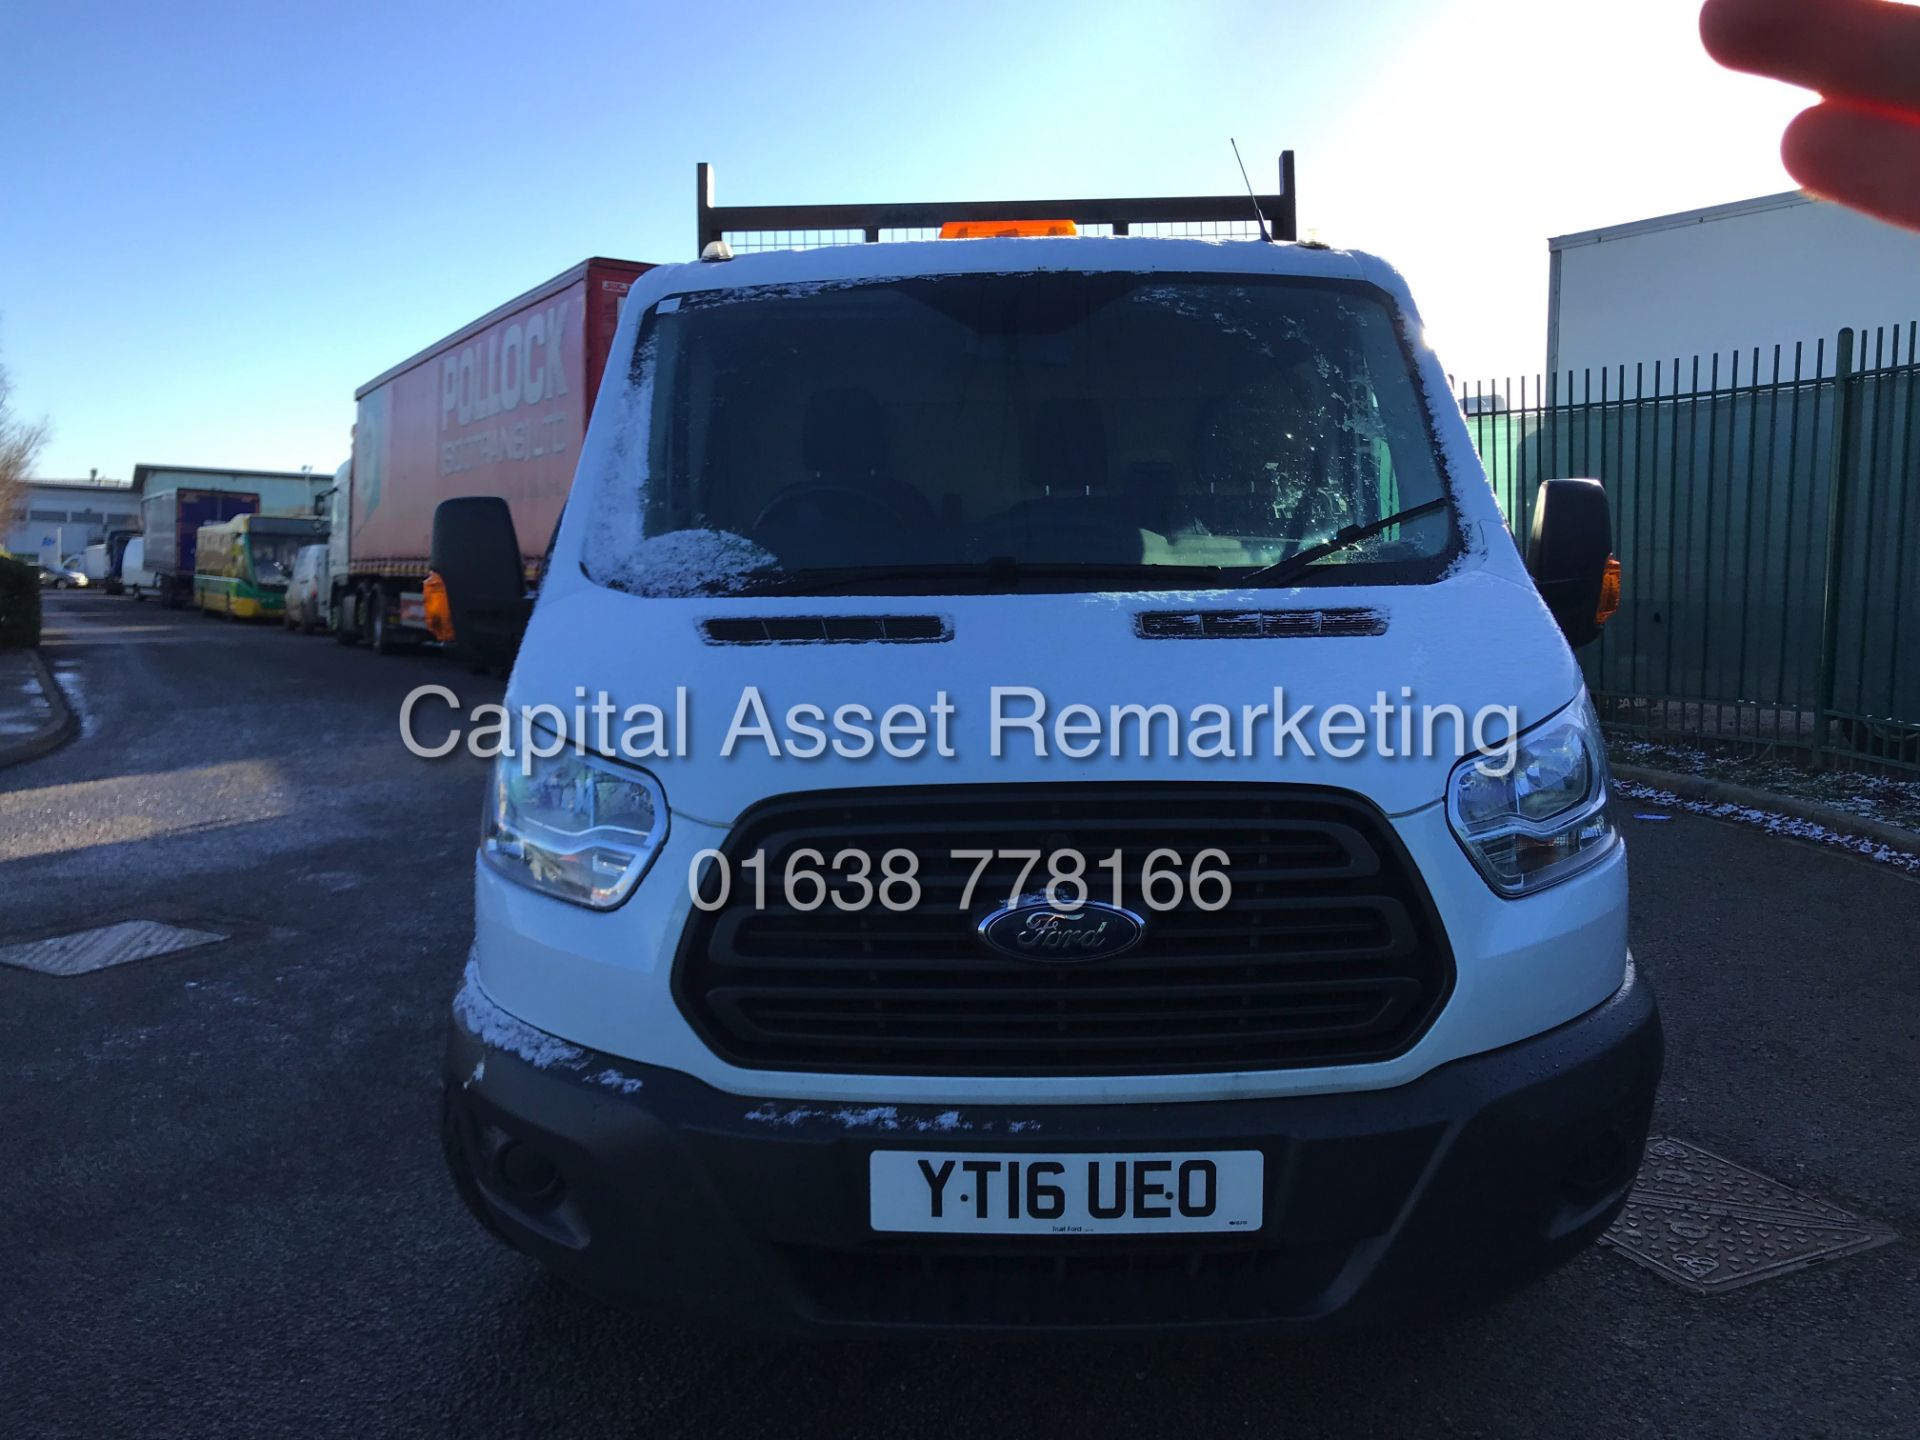 (ON SALE) FORD TRASNIT 2.2TDCI "125BHP - 6 SPEED" T350 D/C "TIPPER" (16 REG) 1 OWNER - LOW MILEAGE - Image 3 of 13